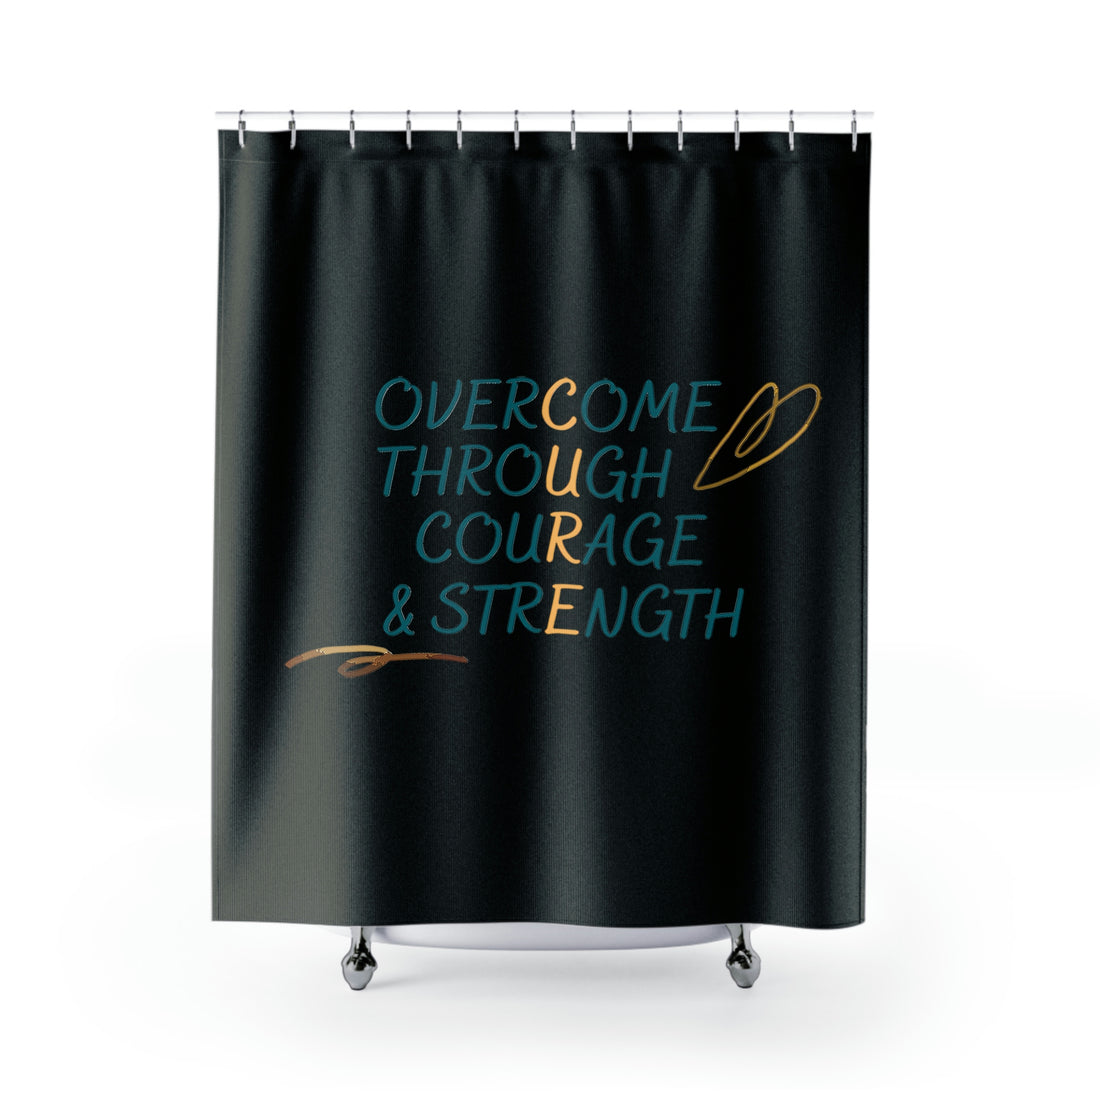 Overcome Through Courage and Strength - Black Shower Curtain